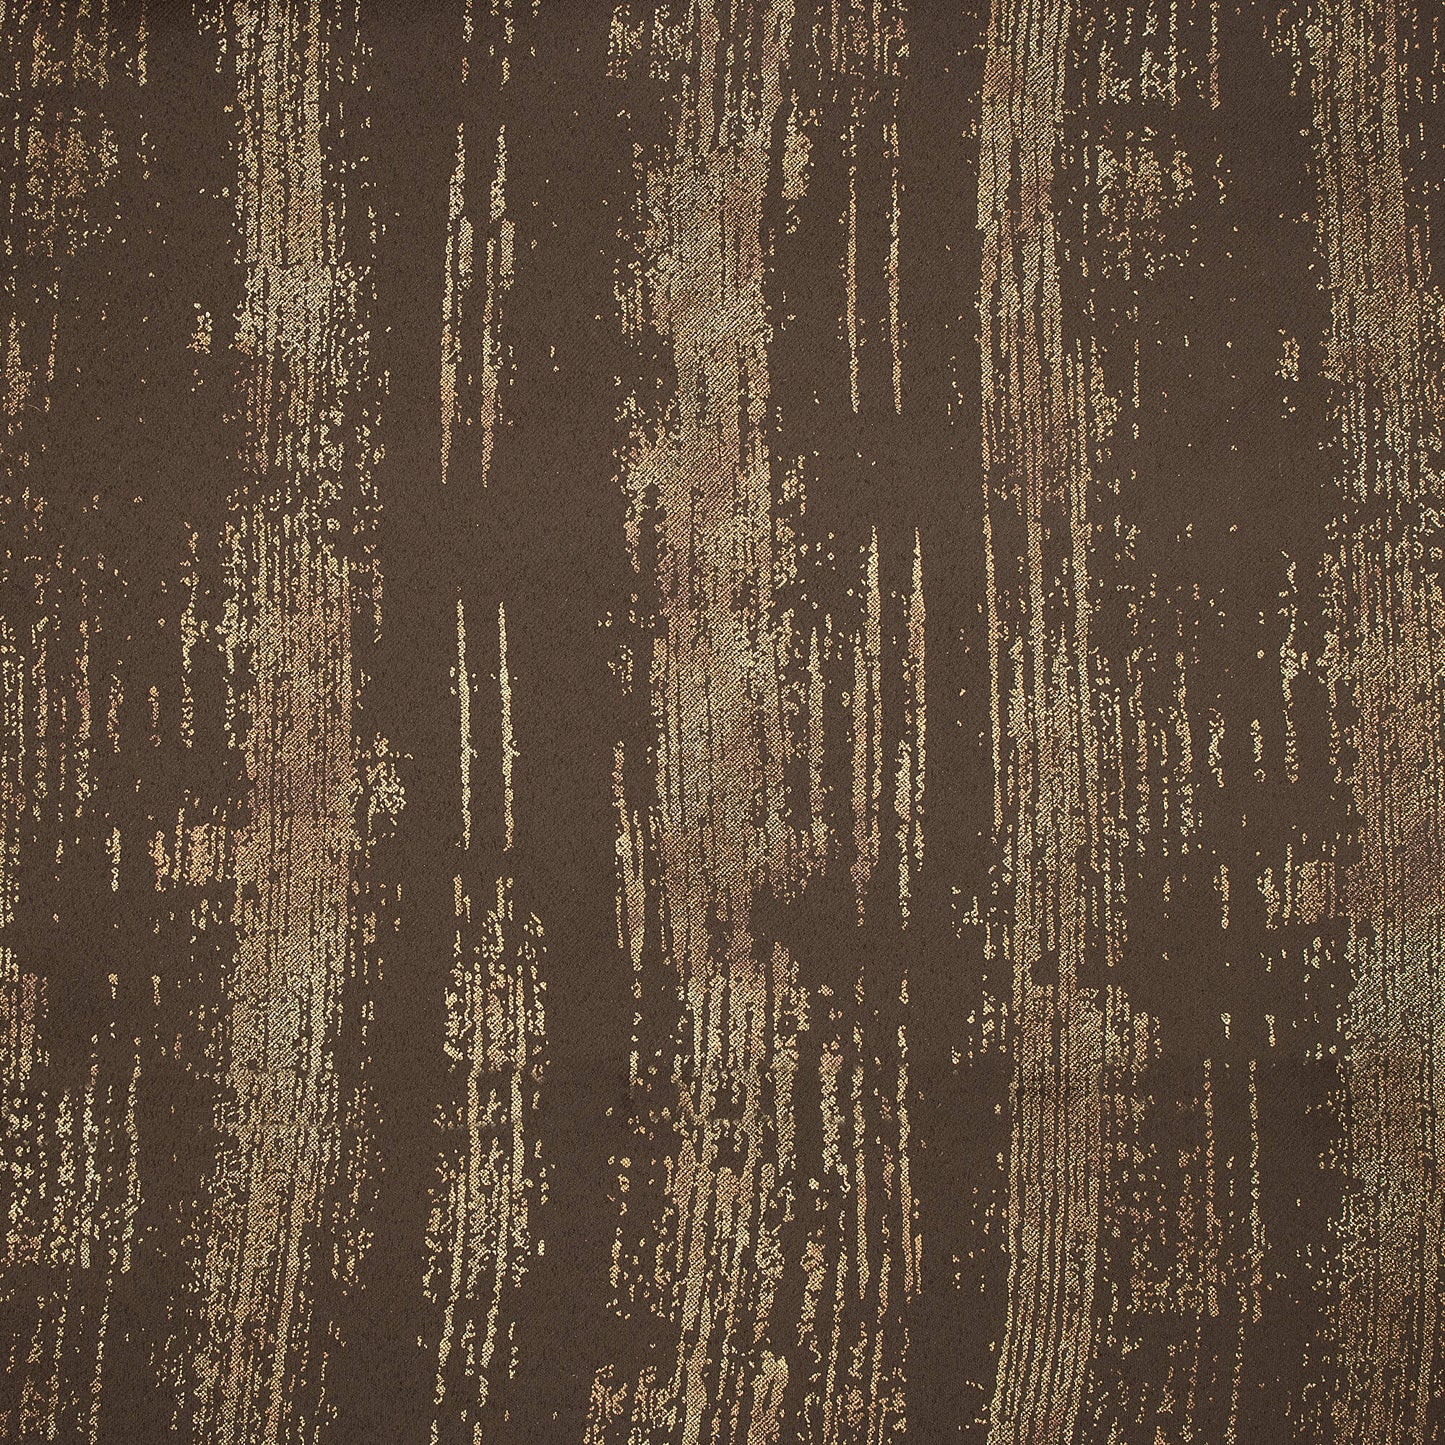 Spice Brown Texture Pattern Golden Foil Premium Curtain Fabric (Width 54 Inches)